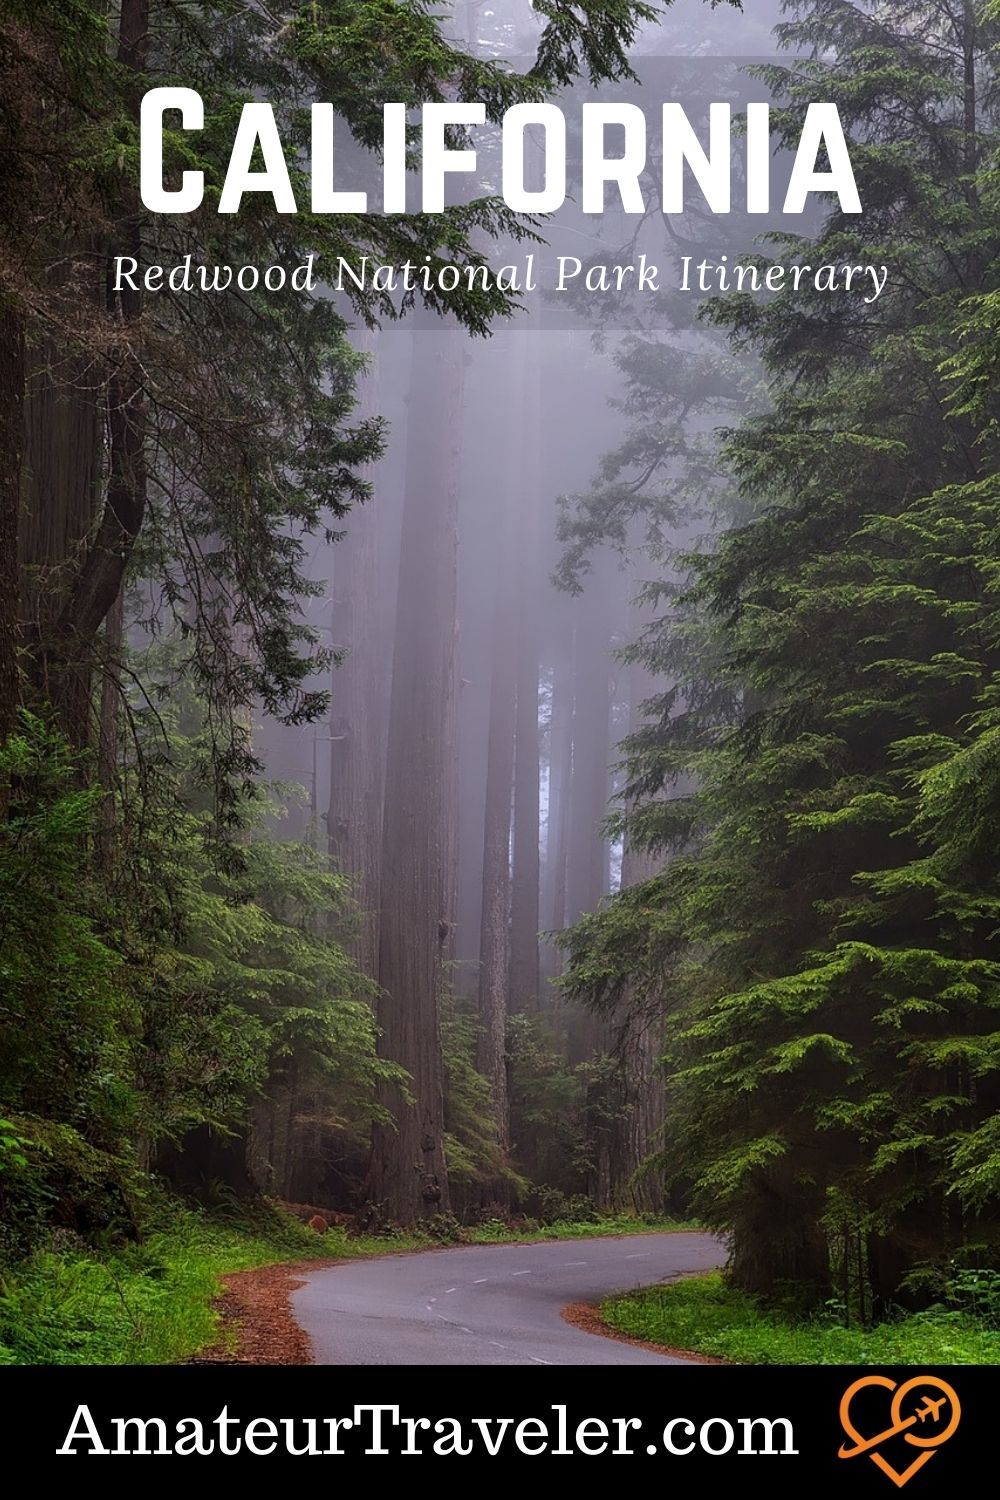 Redwood National Park Itinerary - Big Trees on the California Coast | edwood National Park #redwoods #trees #hikes #california #usa #travel #trip #vacation